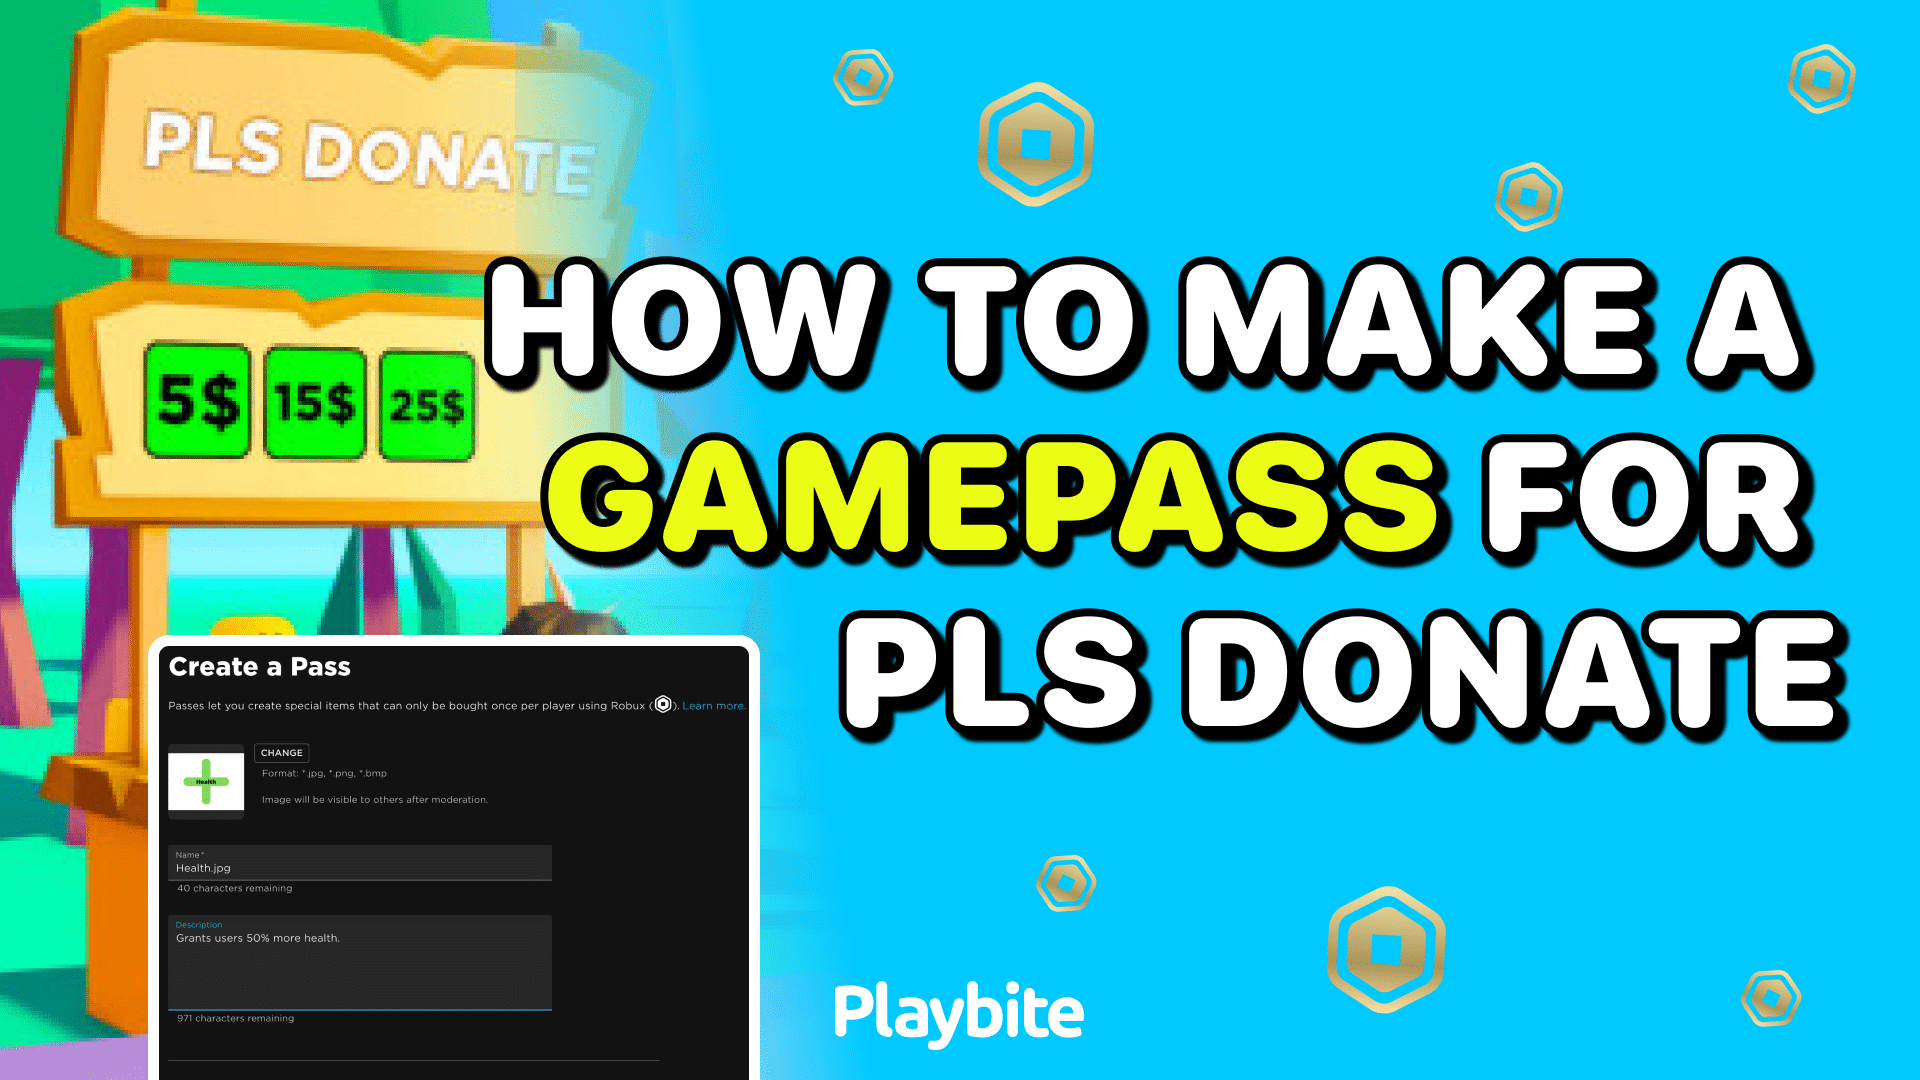 How to Make A Gamepass in Roblox Pls Donate - Add Gamepass to Pls